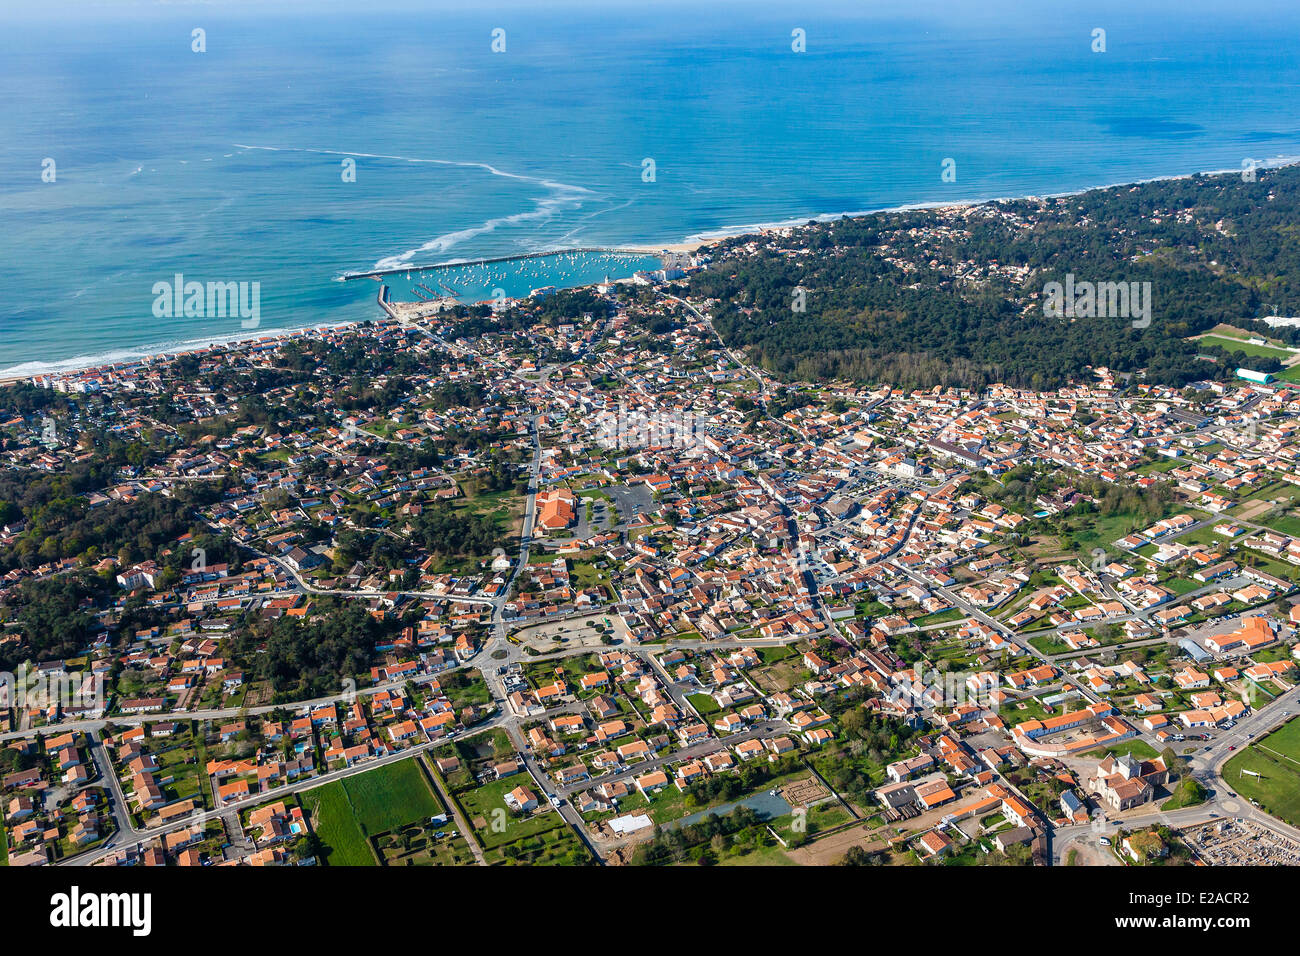 France, Vendee, Jard sur Mer (aerial view) Stock Photo